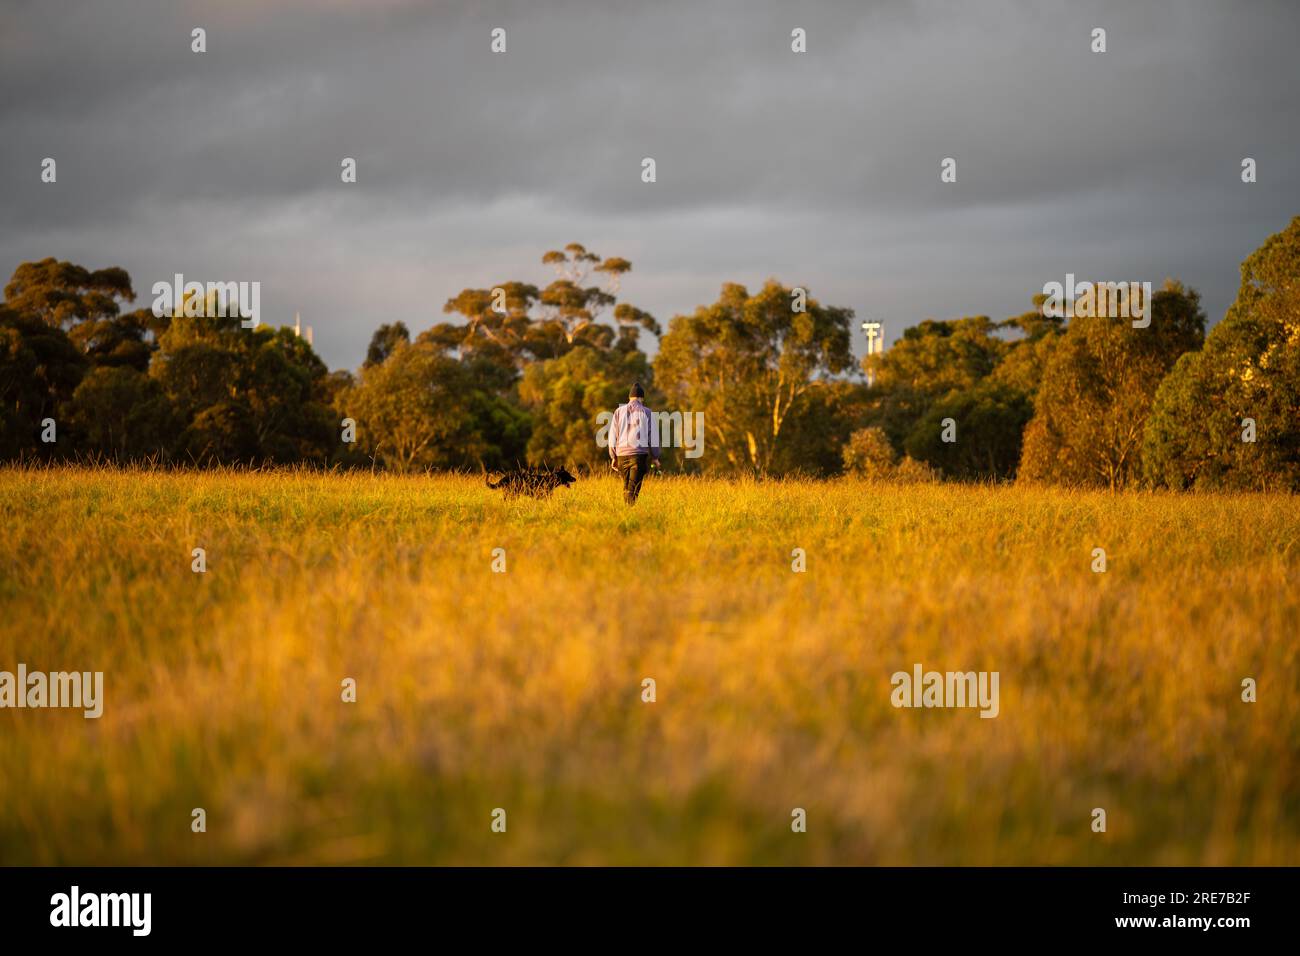 pasture and grasses on a regenerative farm. native plants storaging carbon at dusk Stock Photo